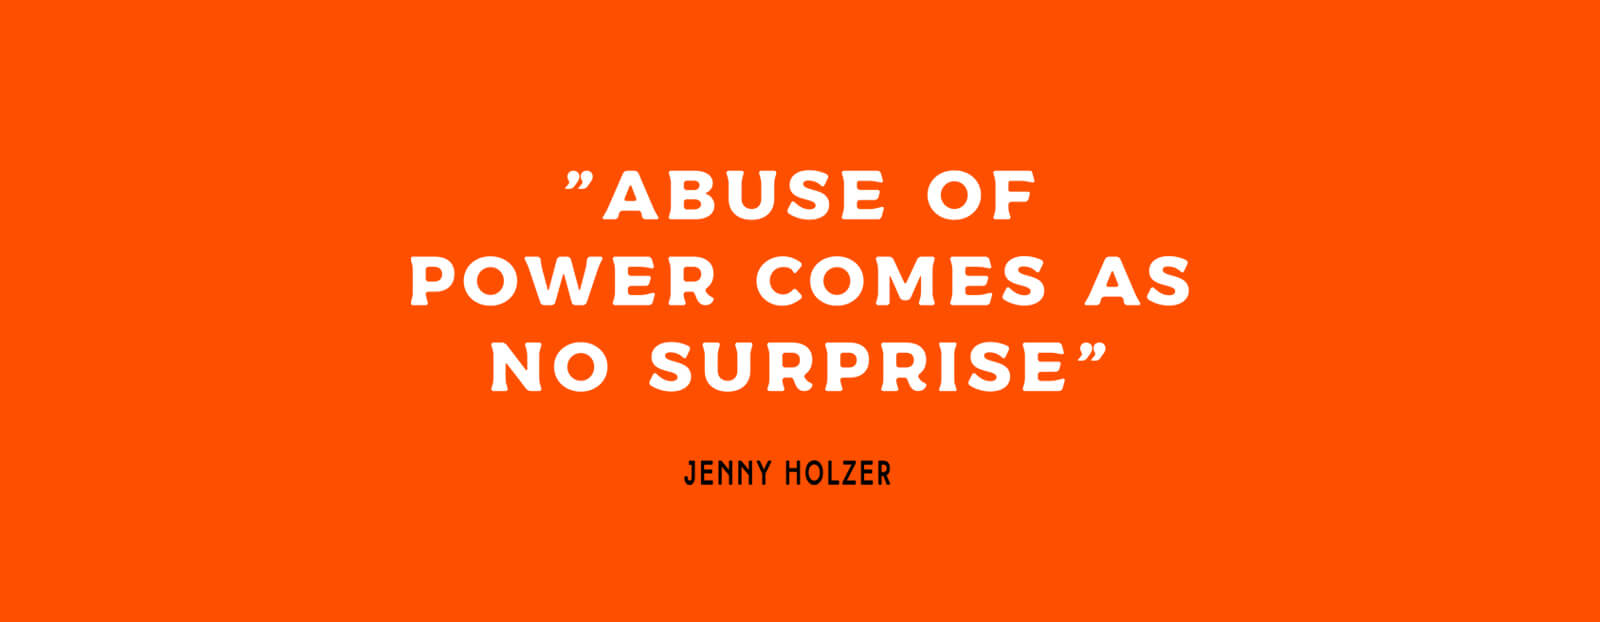 abuse of power comes as no surprise print jenny holzer